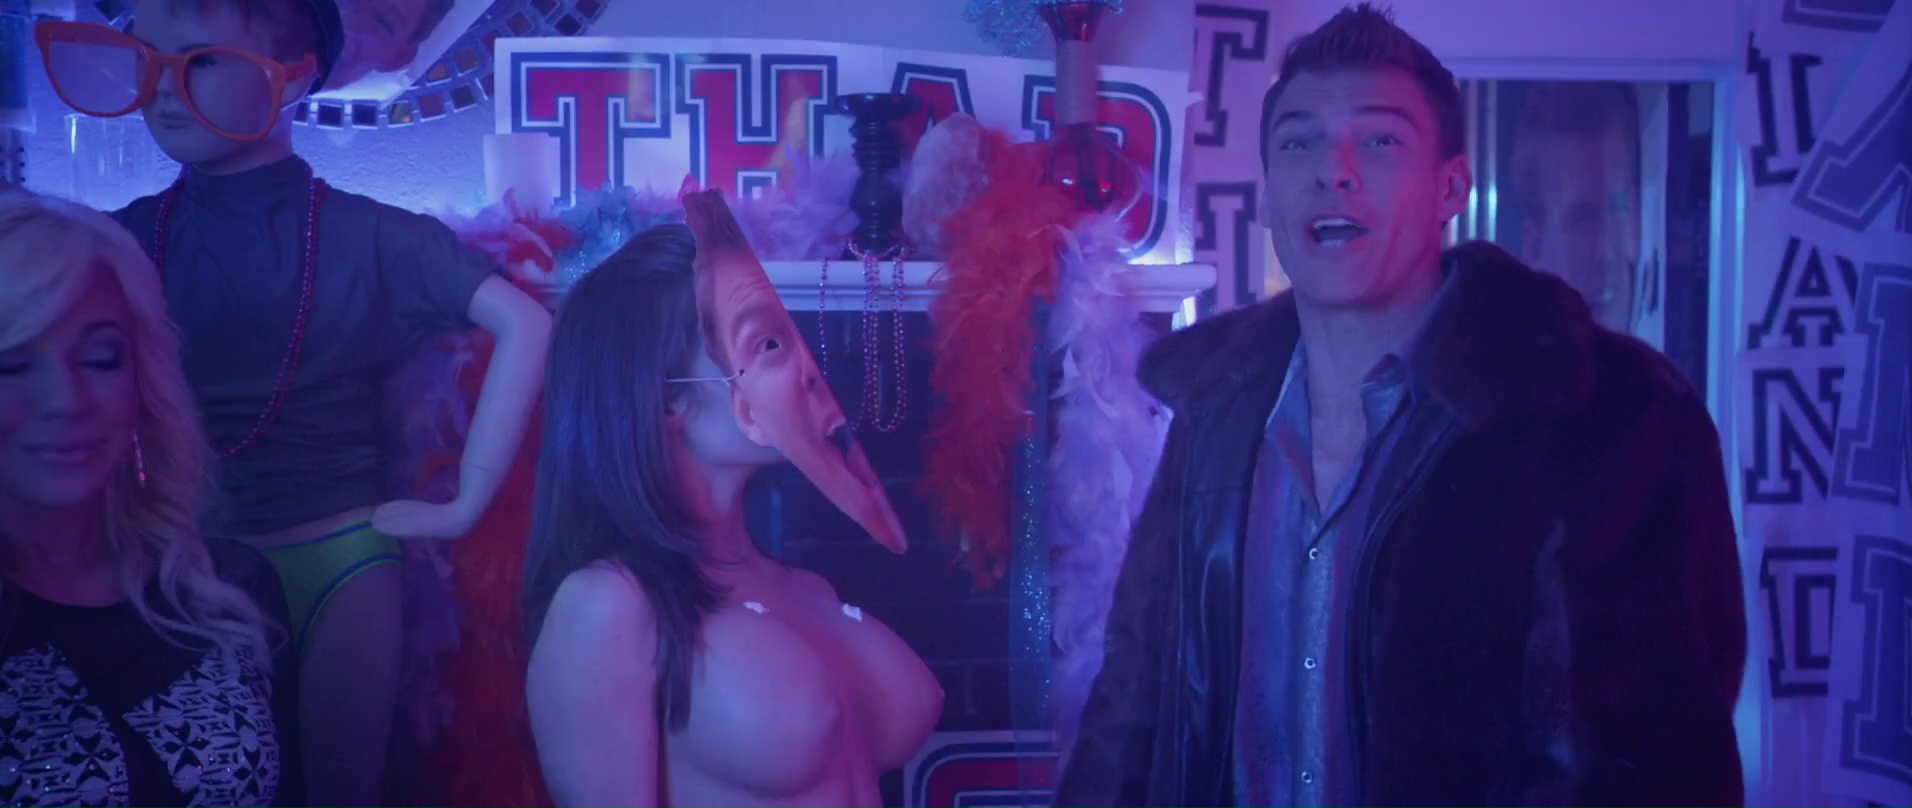 Blue Mountain State: The Rise of Thadland nude pics.